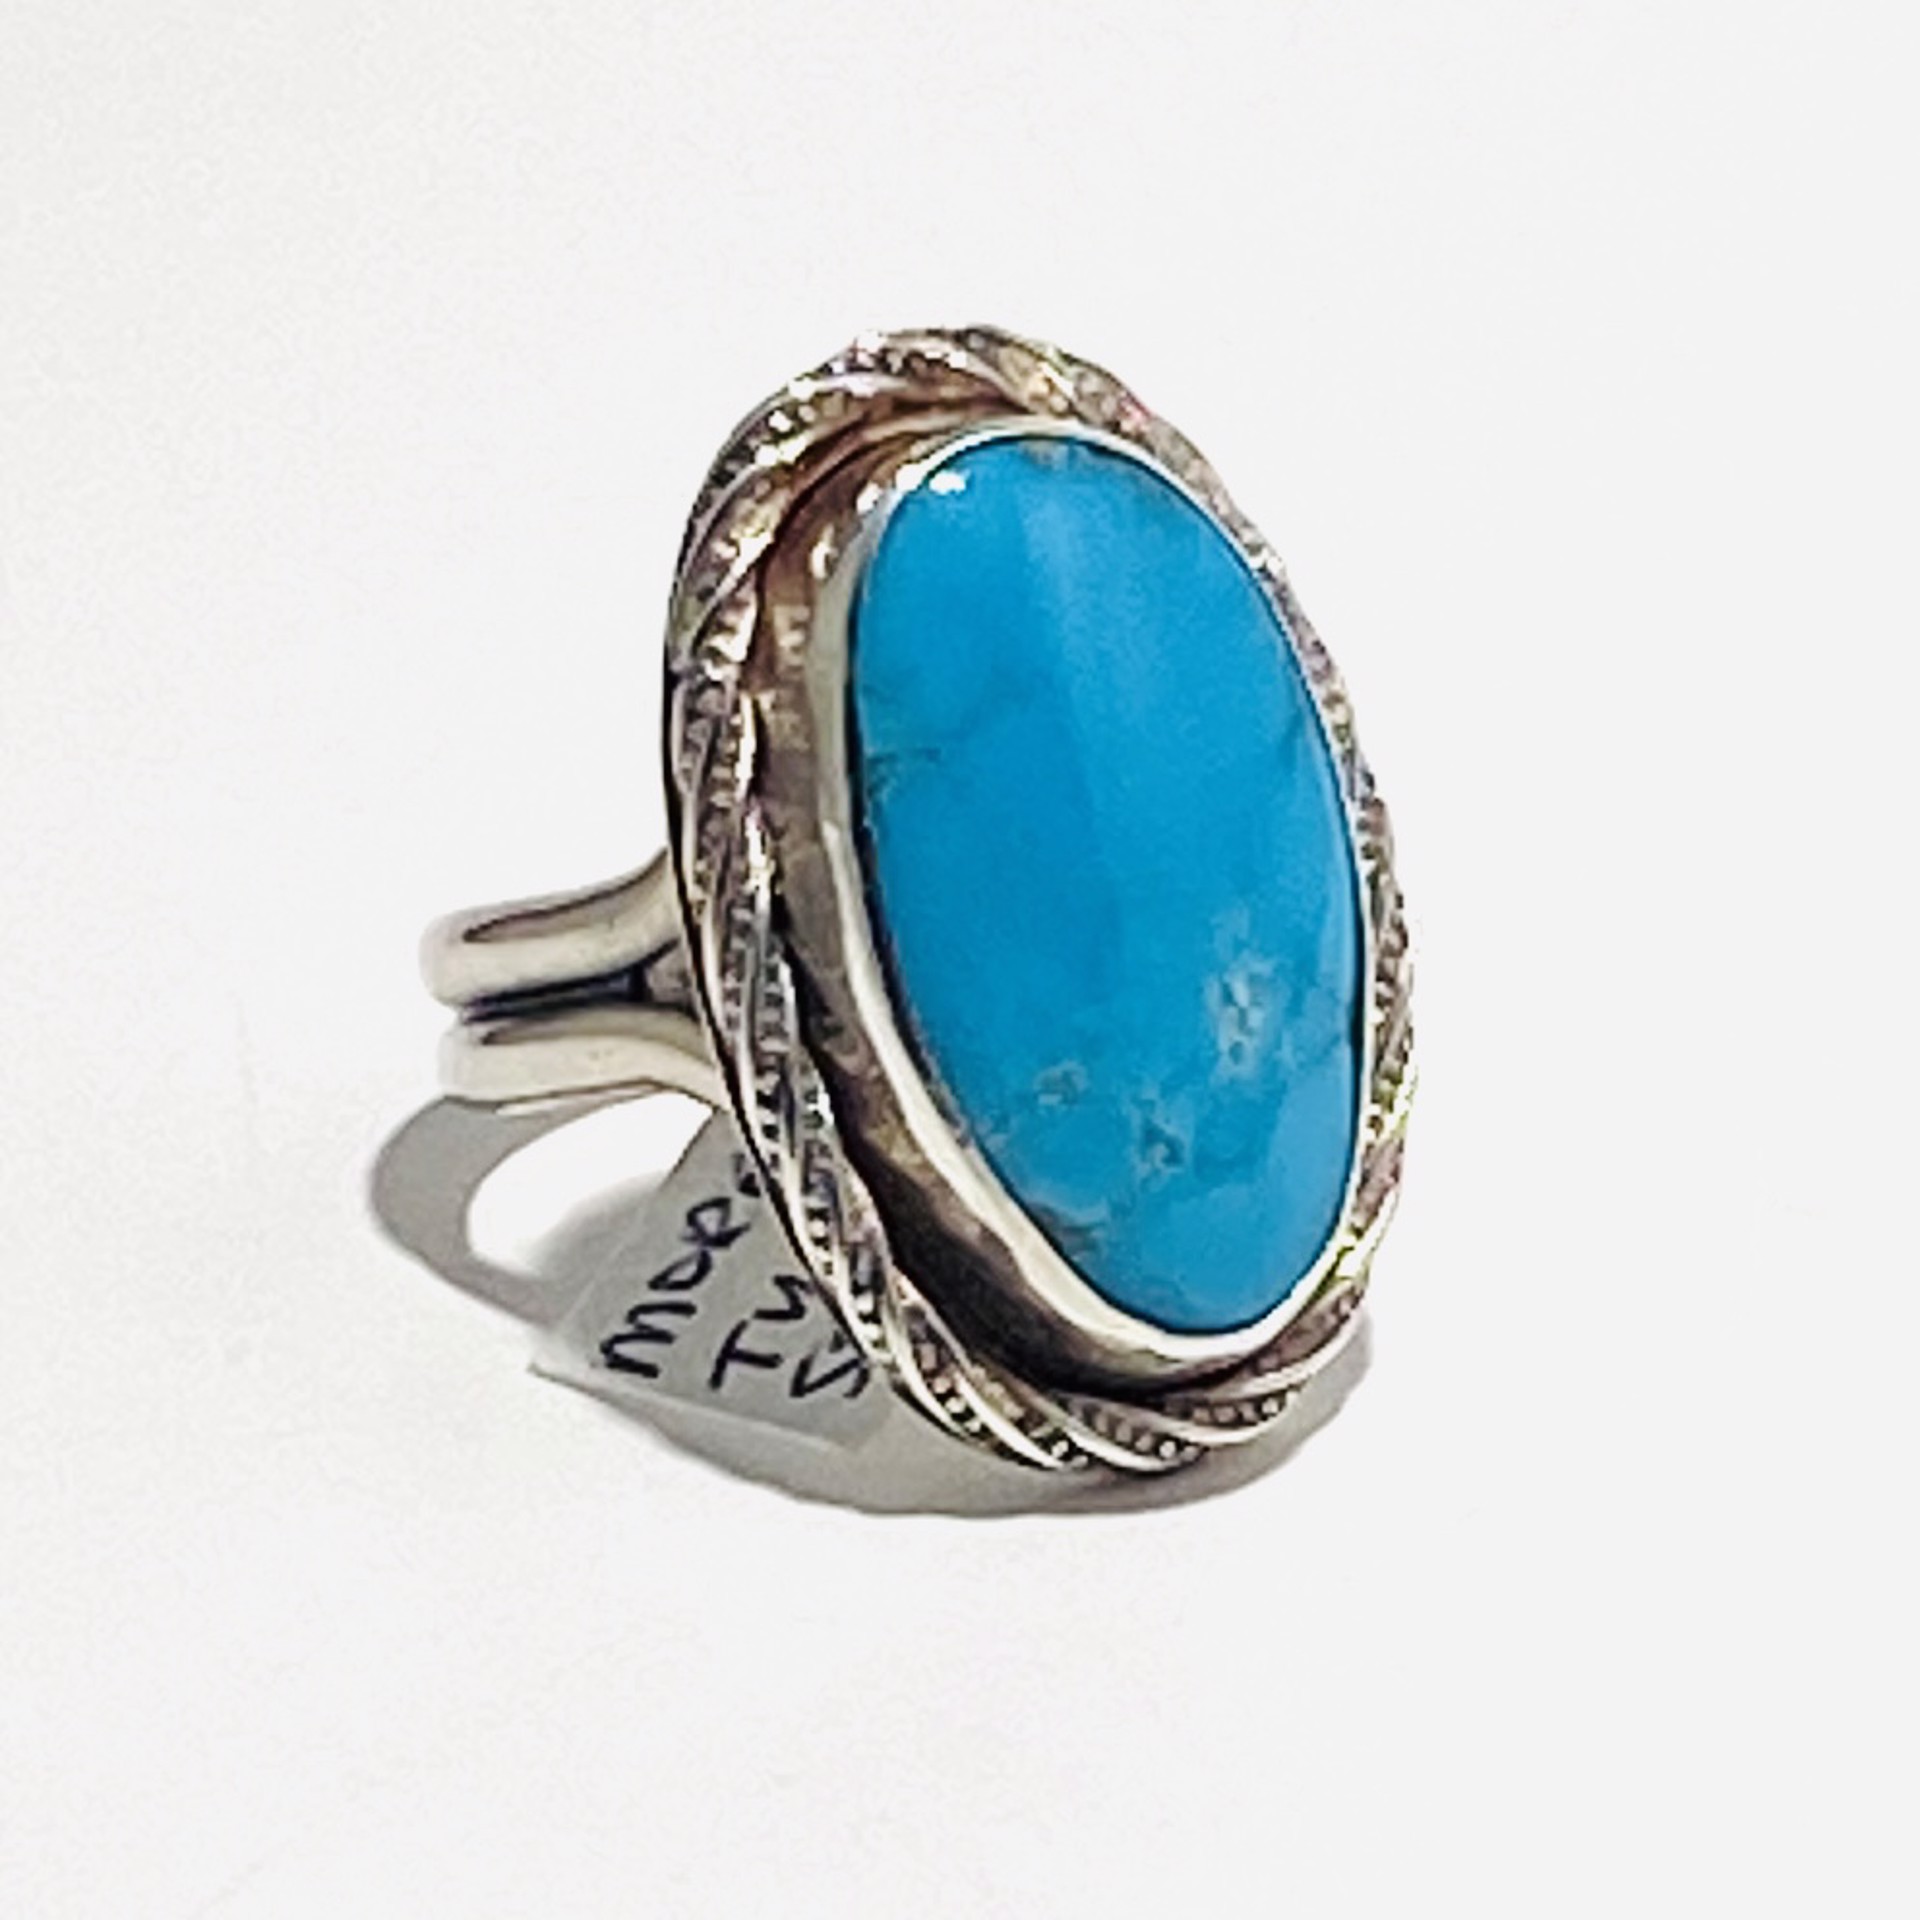 Large Oval Morenci Turquoise Ring sz8 AB22-35 by Anne Bivens